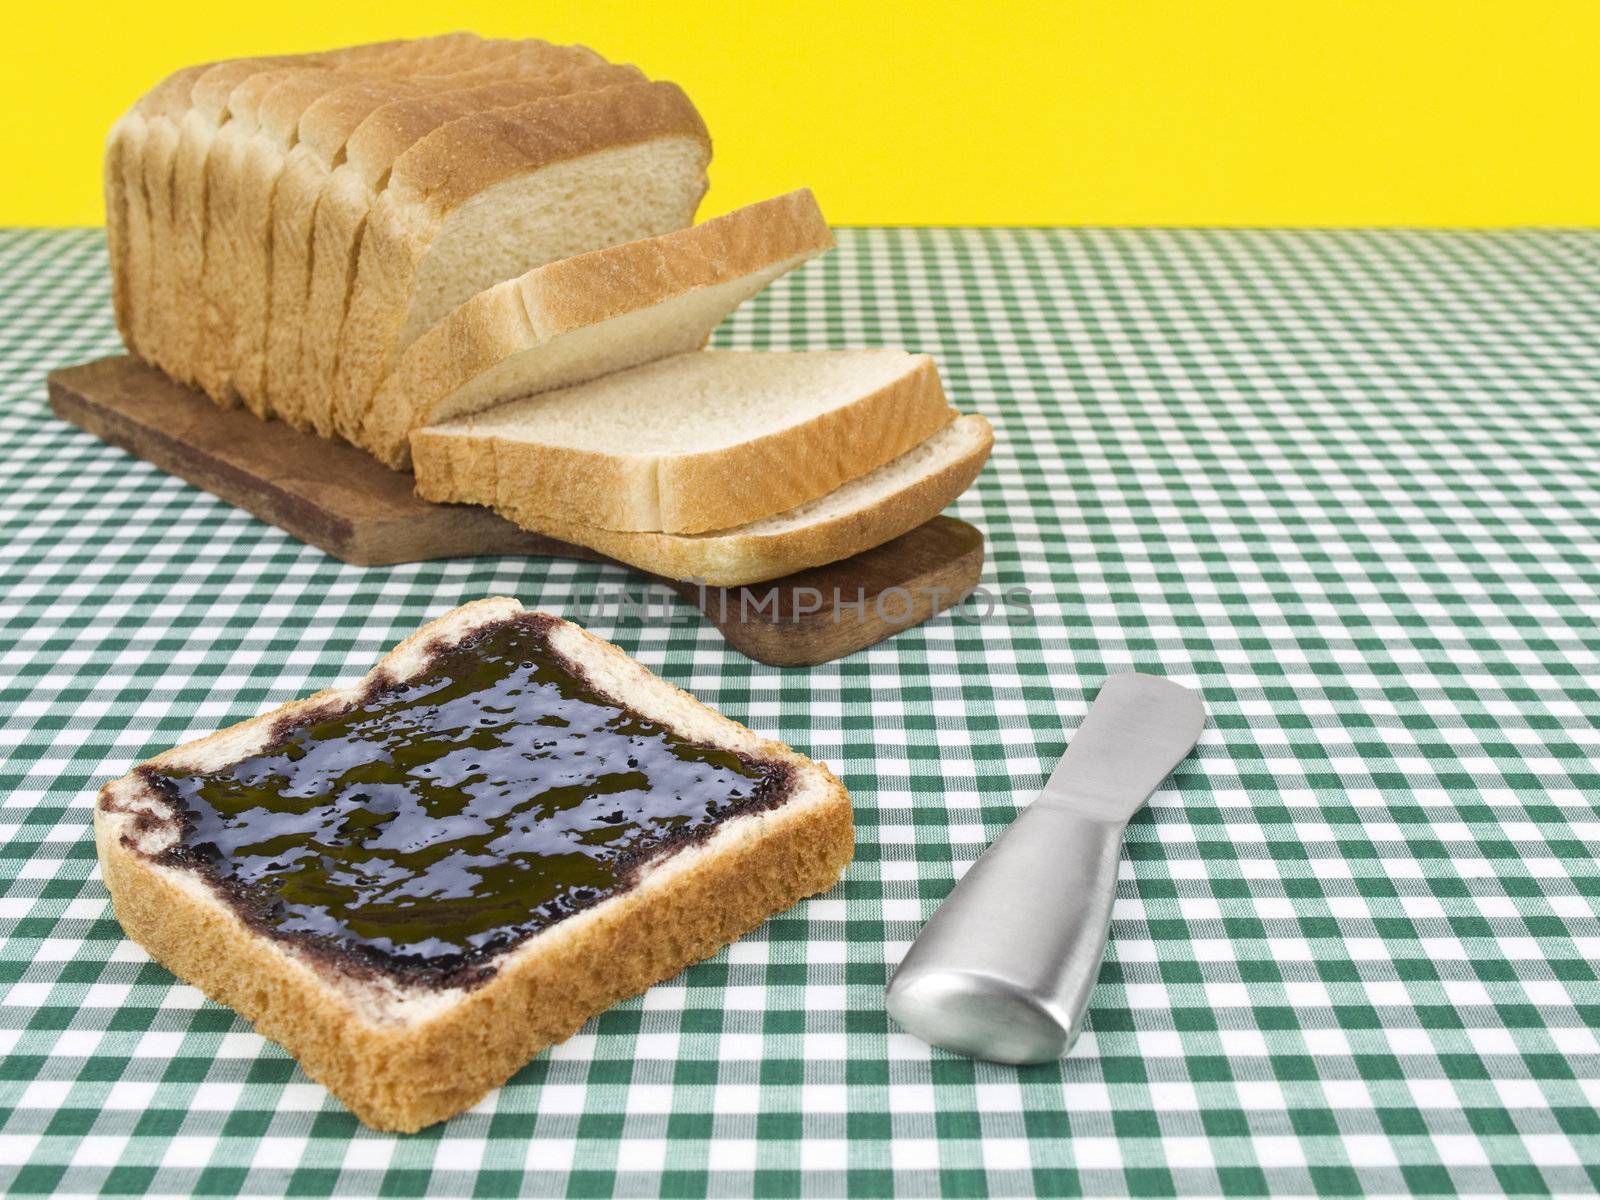 A slice of bread spread with jam beside the loaf of bread.